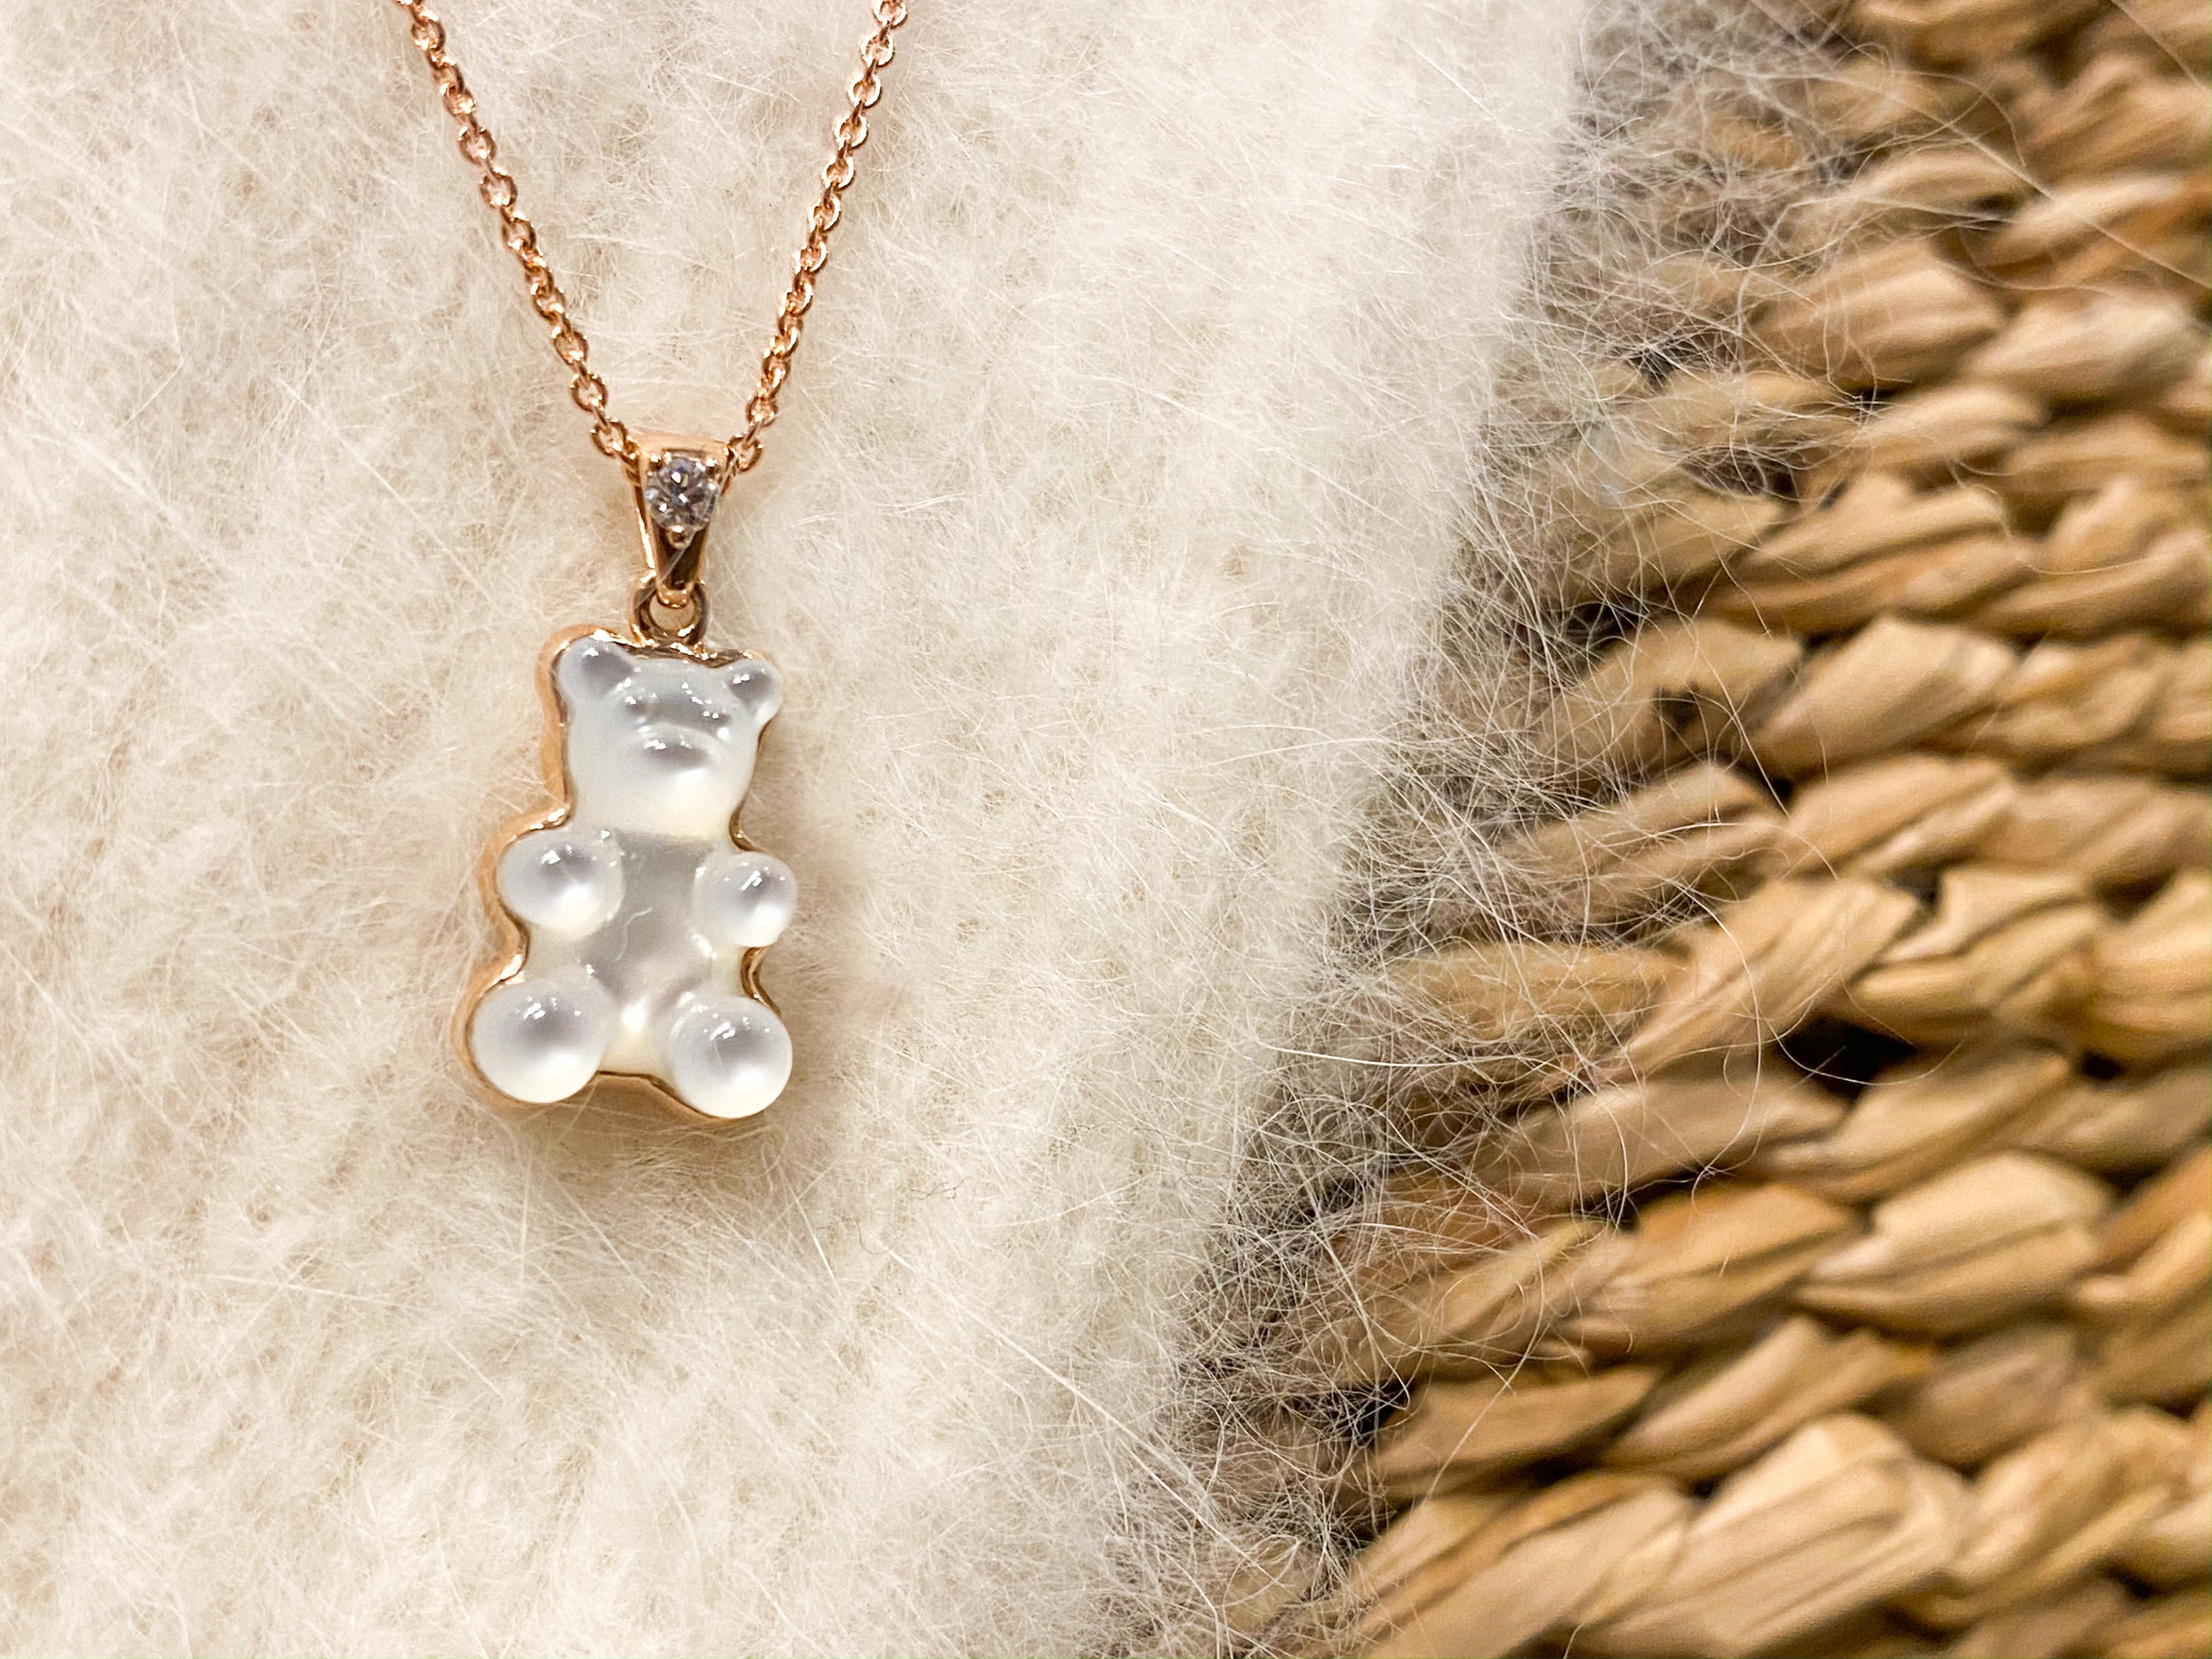 Mother Of Pearl brings the gentle healing power of the sea. It is a stress relieving stone that stimulates our intuition, imagination, sensitivity and adaptability.

Provenance stone: Korea 
Stone: Natural Pearl
Size bear: 8,5mm (measured without